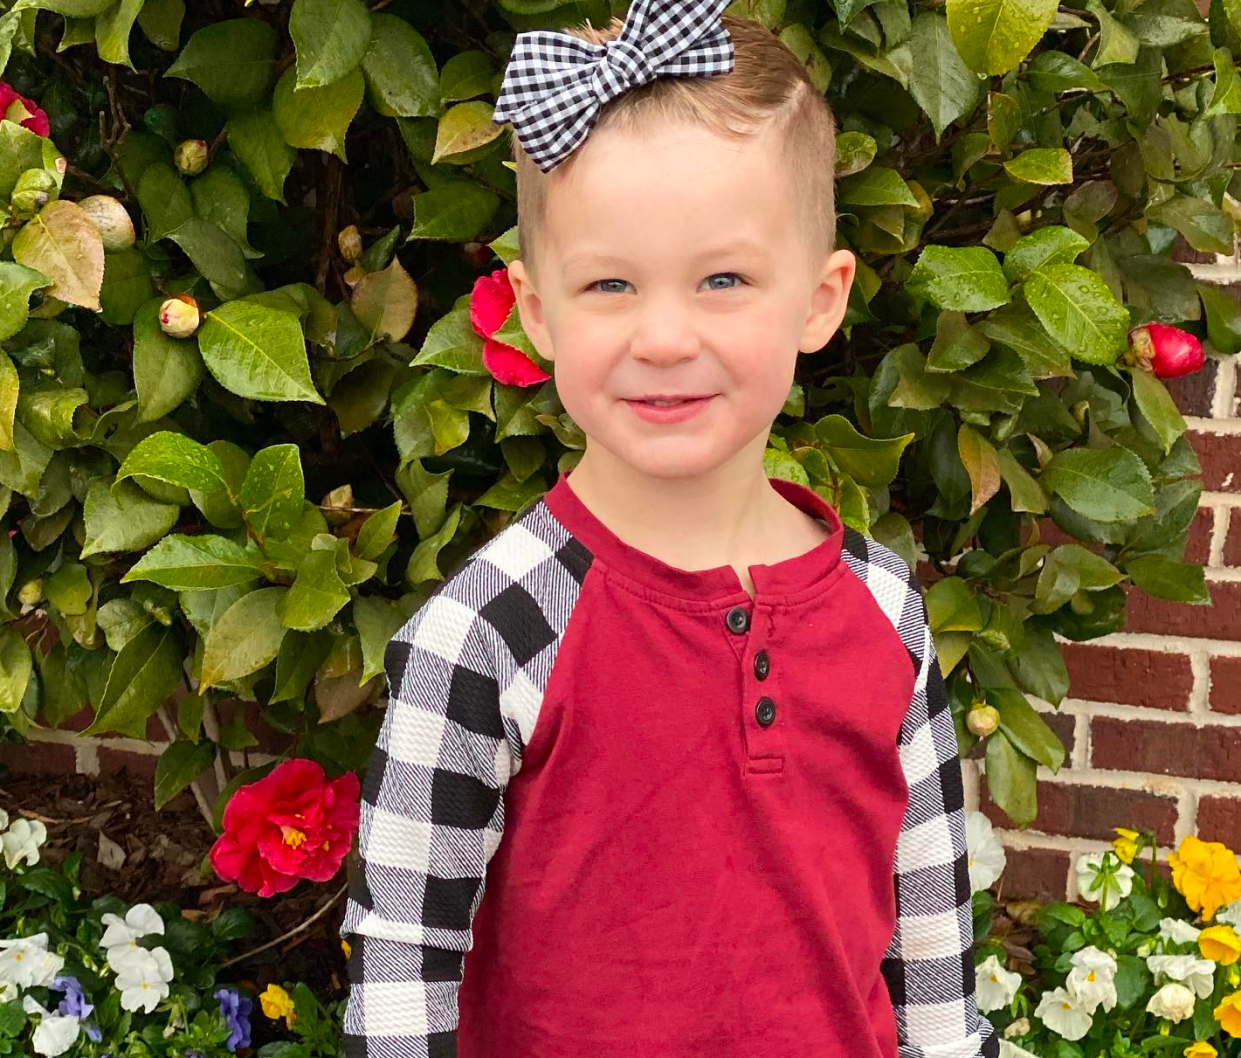 BriAnne Herbert says her son, Duke, loves twirling in dresses and playing My Little Pony with his sister just as much as he loves dinosaurs, monster trucks and sports. (Photo: BriAnne Herbert)